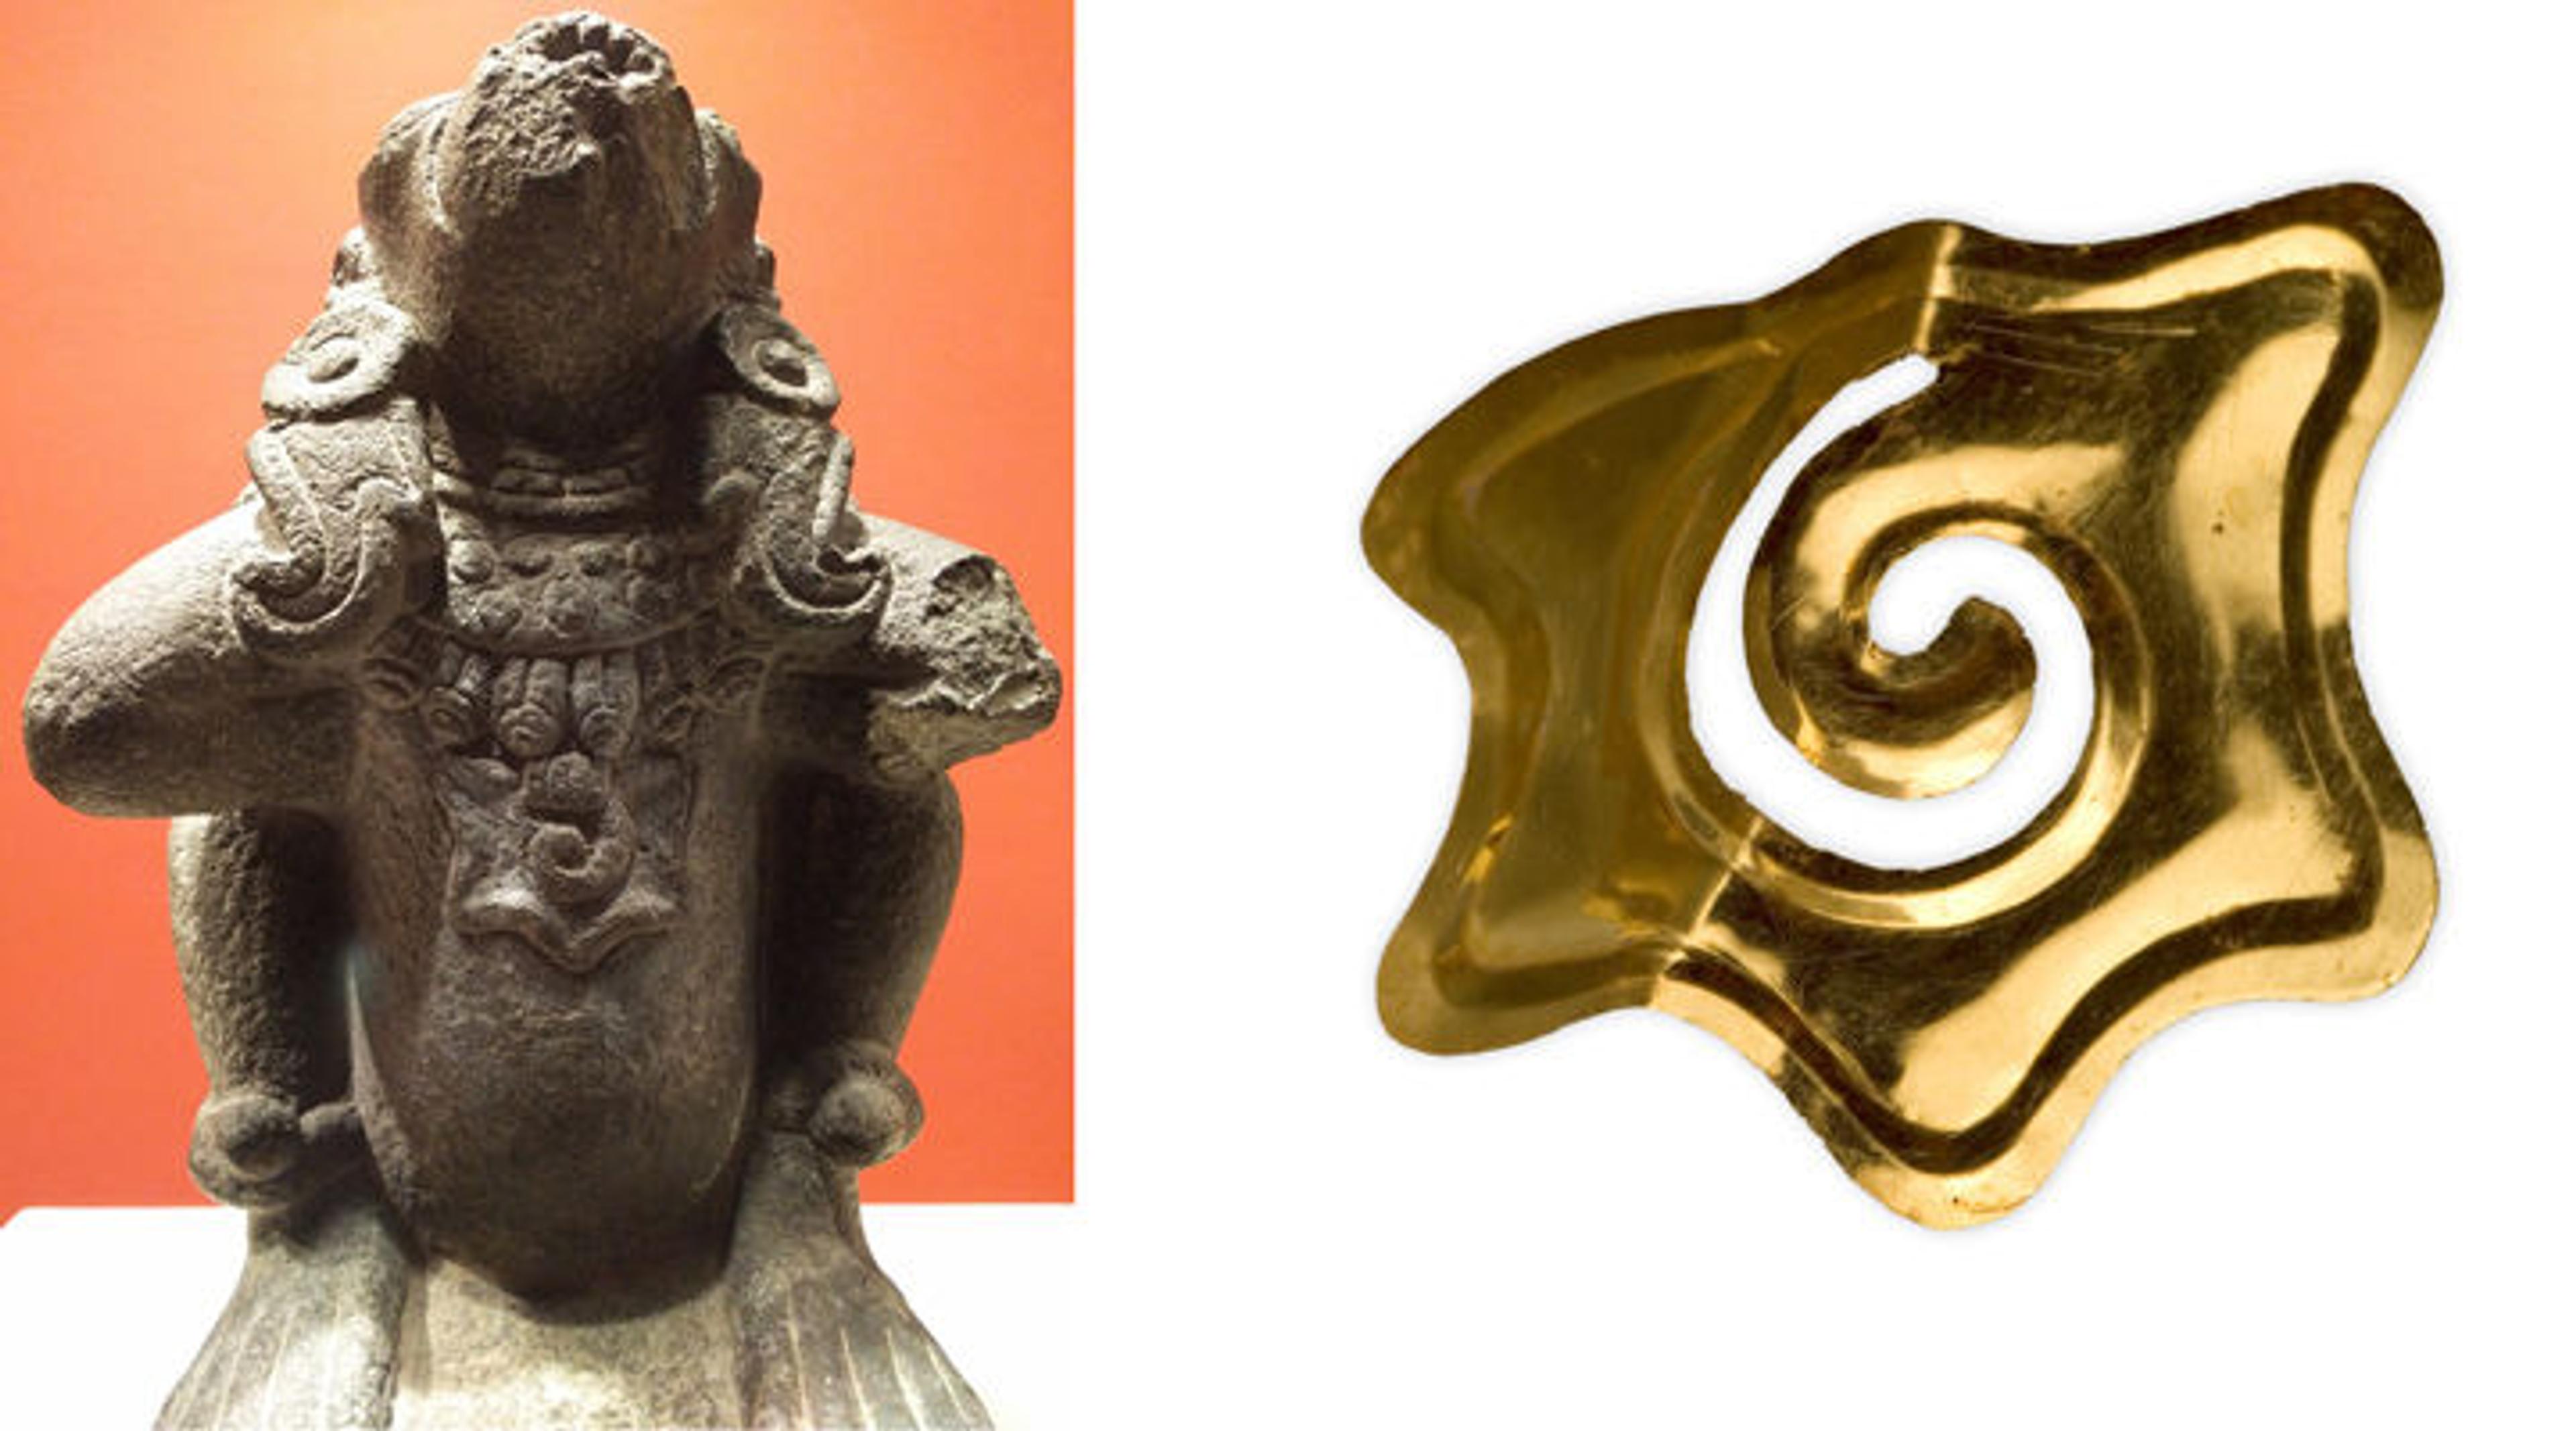 At left, a detail view of a spider monkey sculpture showing different regalia; at right, a 15th-century gold conch-shell pendant from Mexico